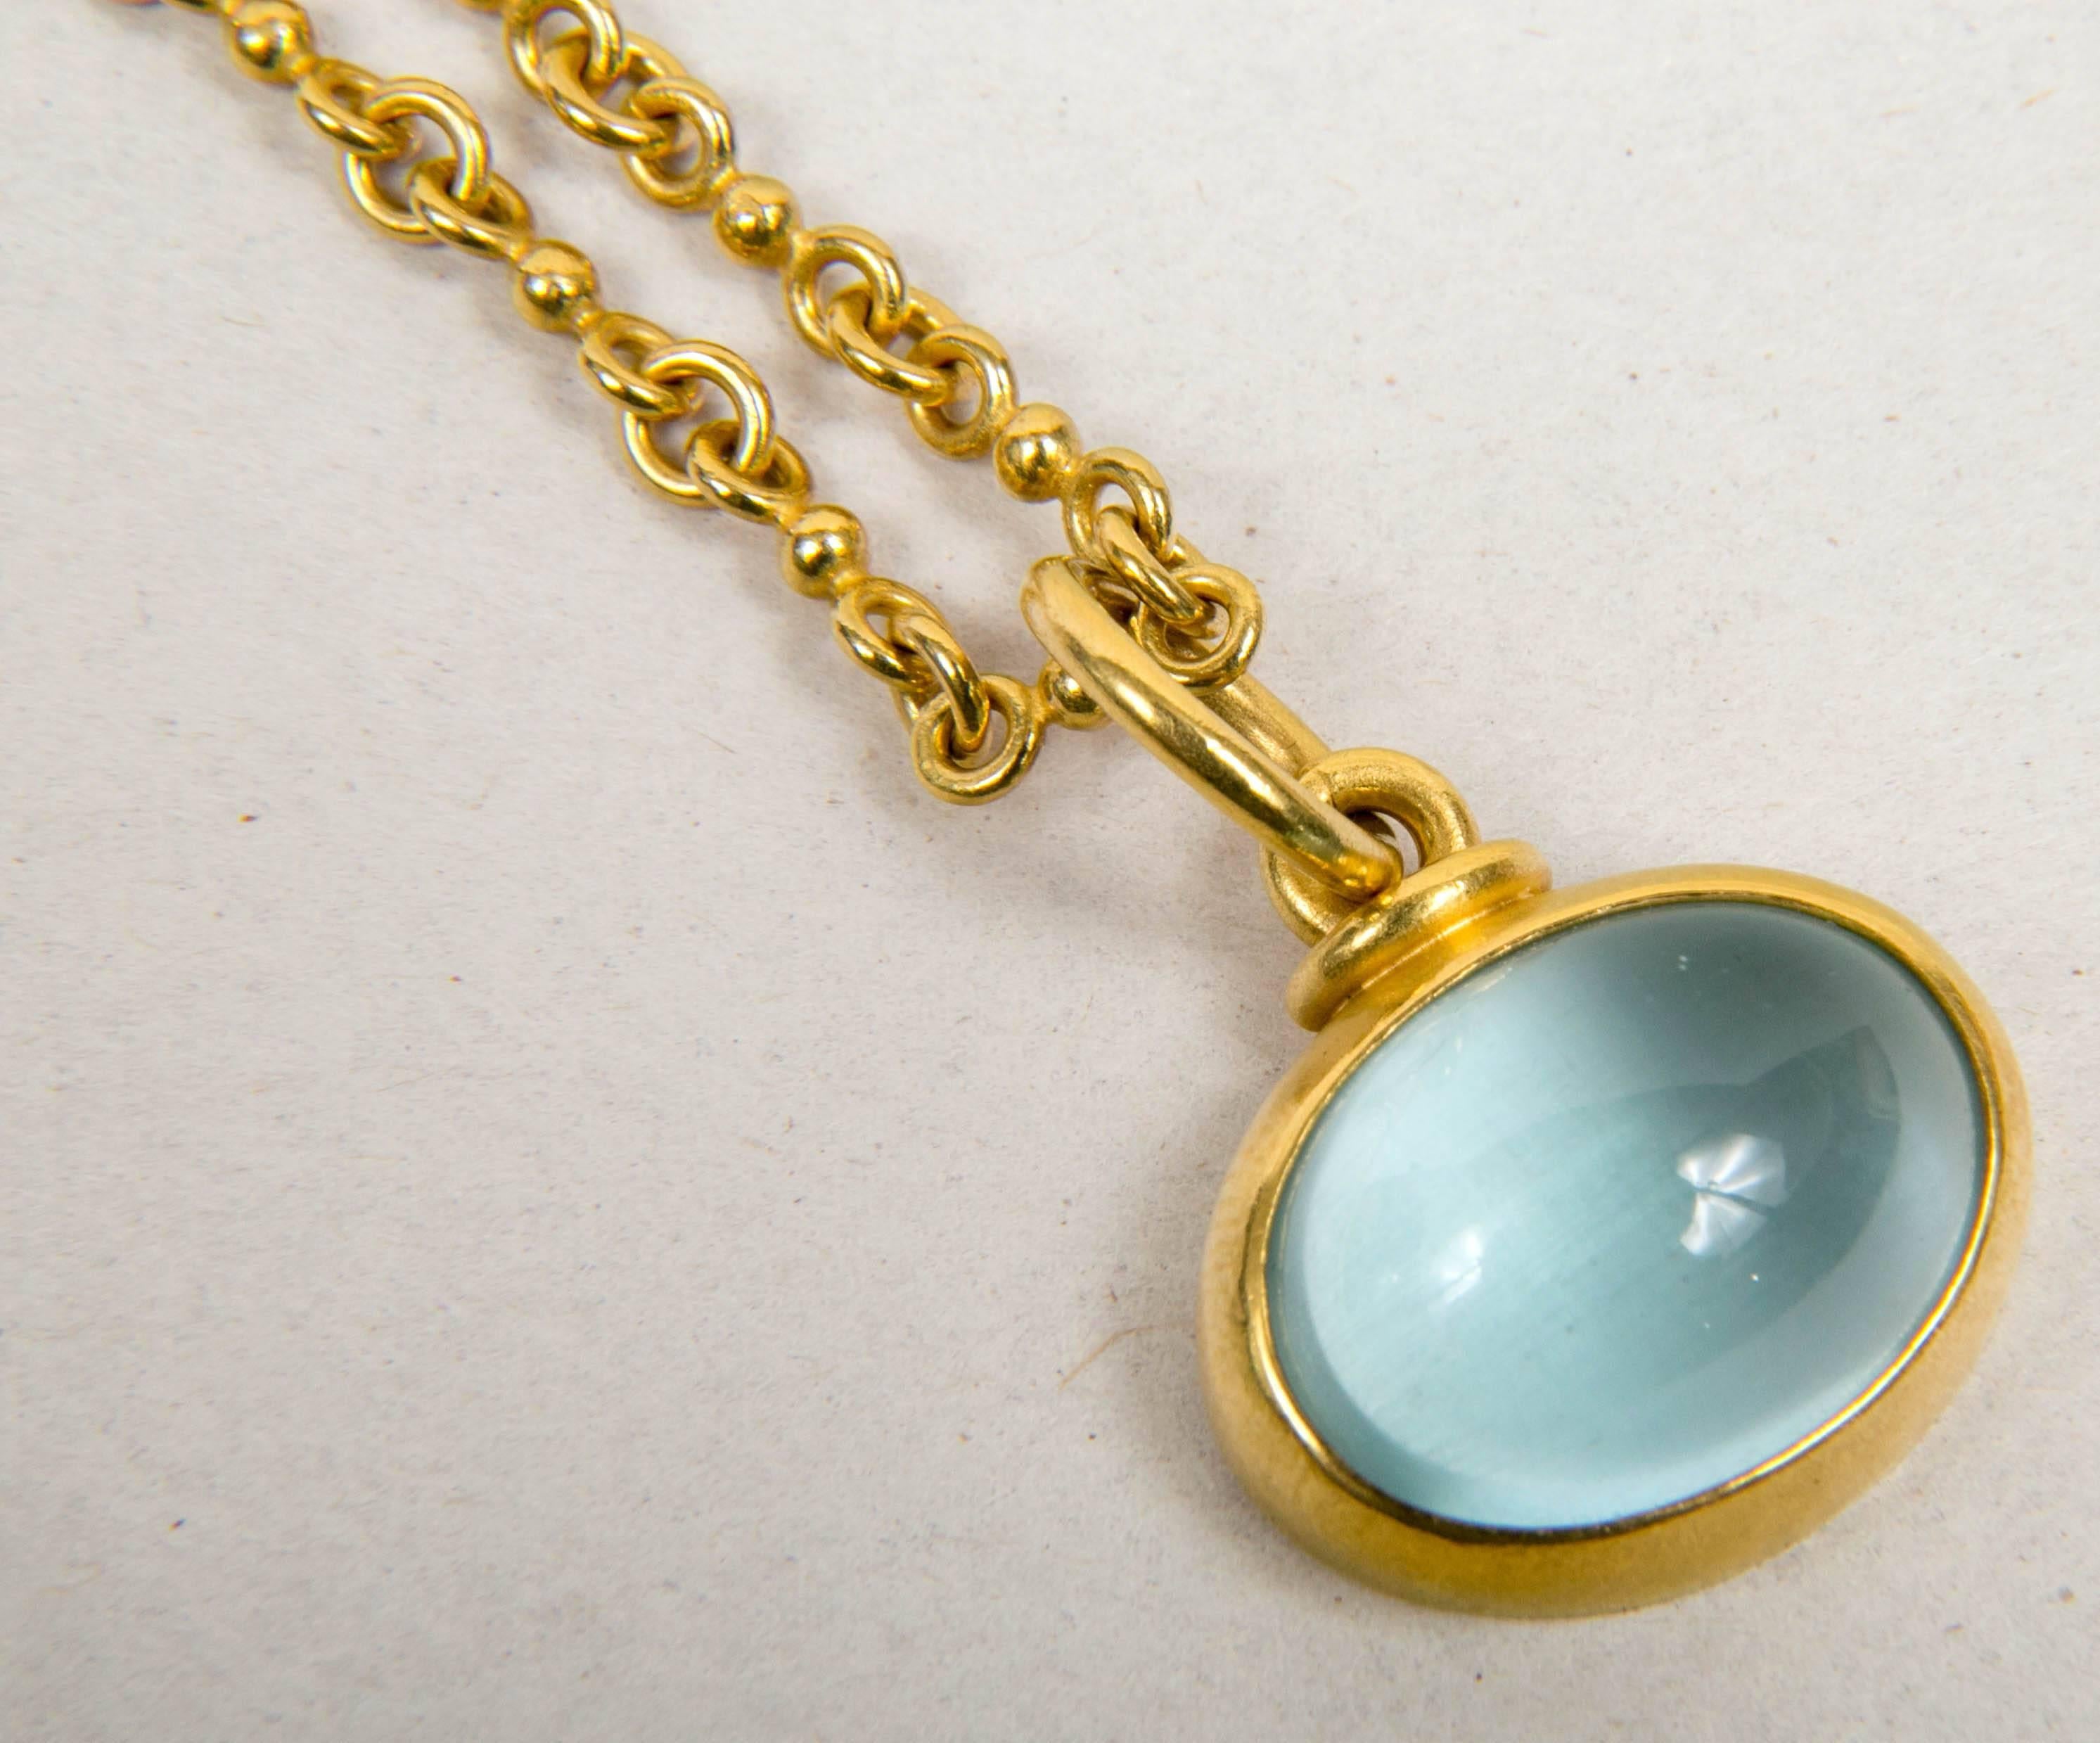 By Denis Belesh. Chain constructed with 22k yellow gold, clasp is 18K for safety. Pendant: 20 carats Green Moonstone with 